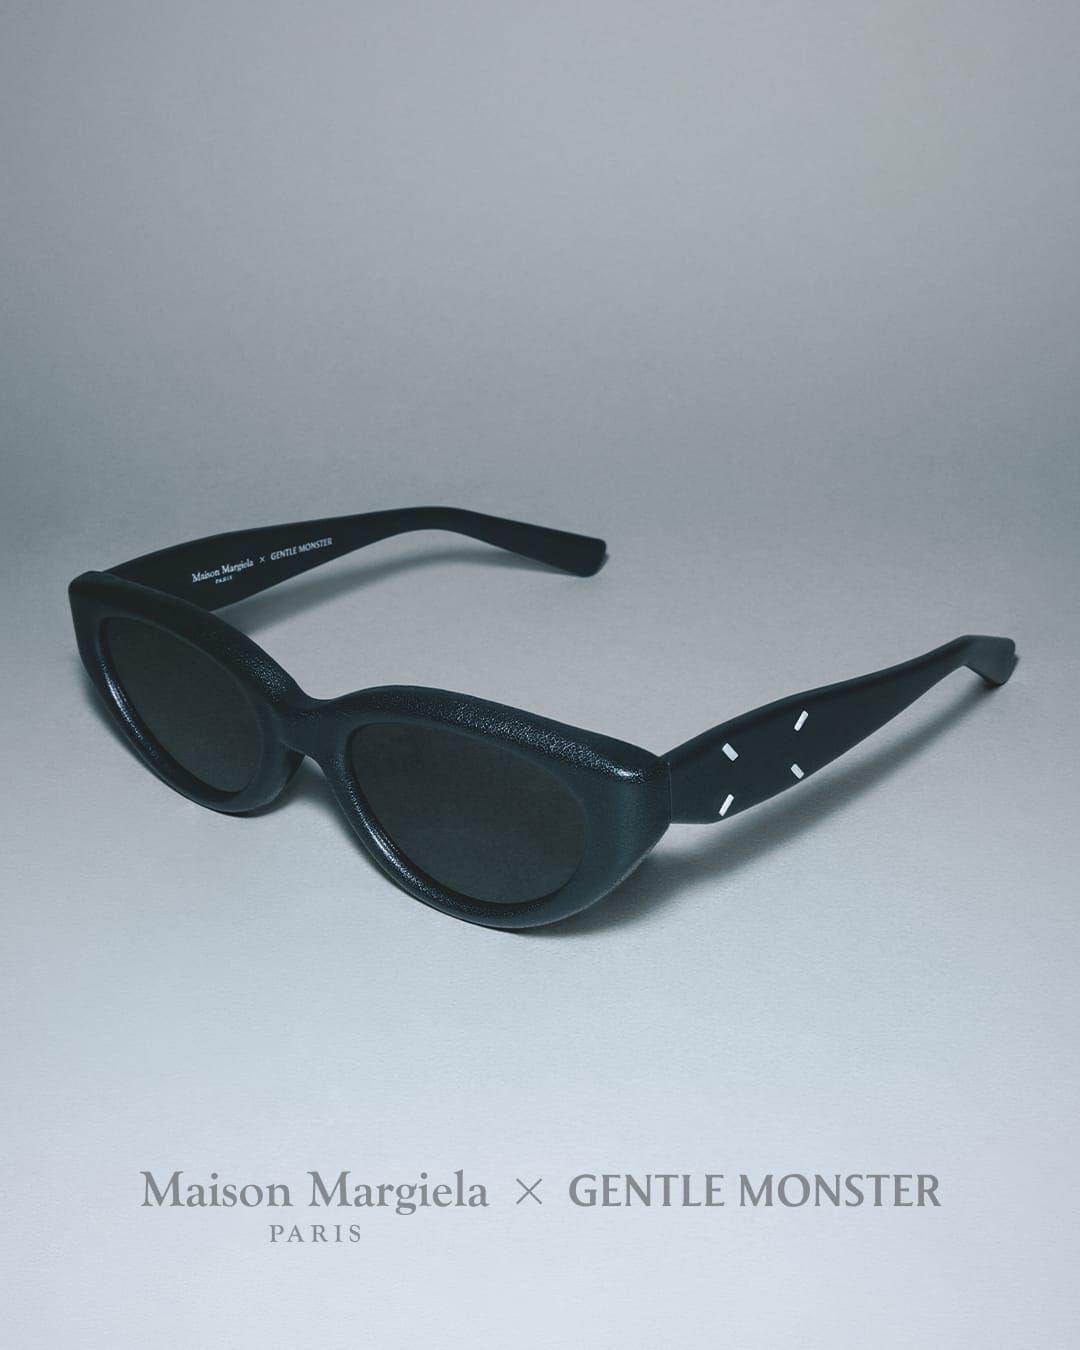 here's where you can buy the maison margiela x gentle monster collaboration in kl